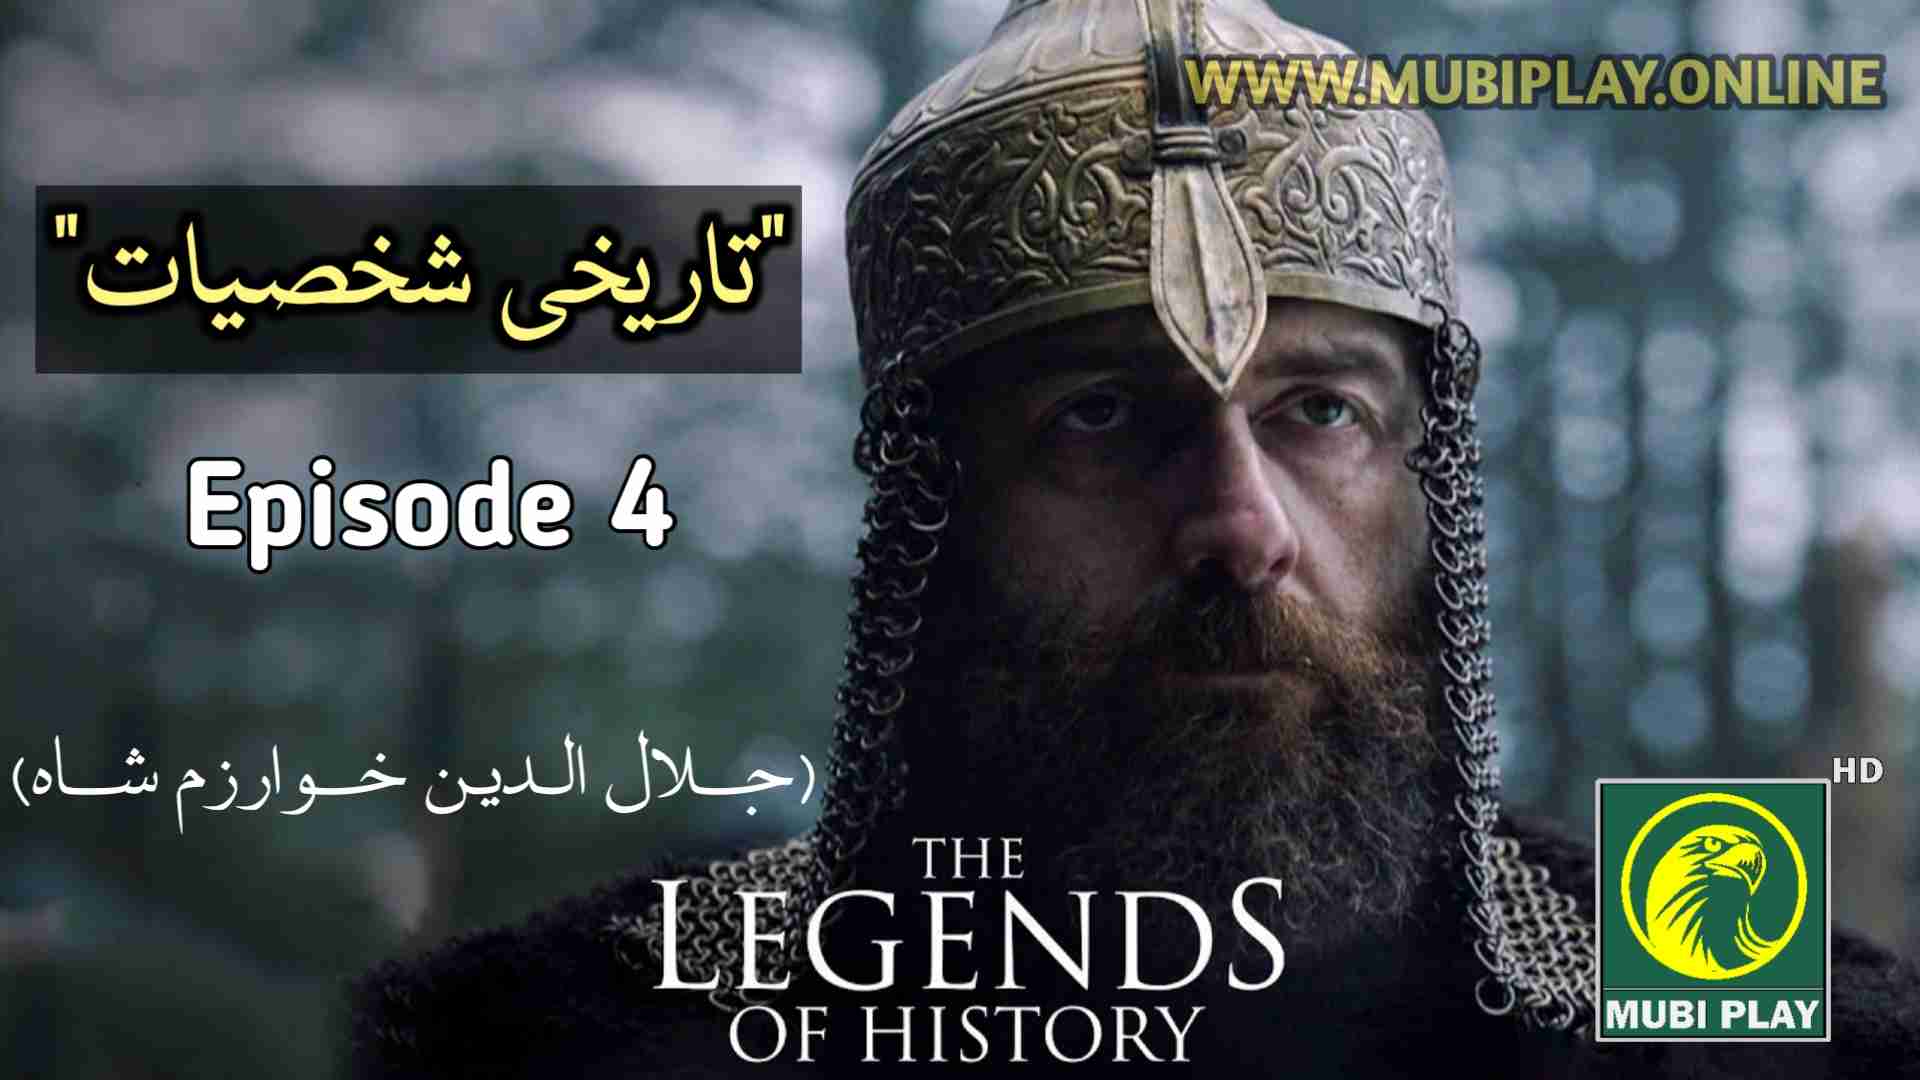 Legends of History Episode 4 with Urdu Subtitles by MubiPlay